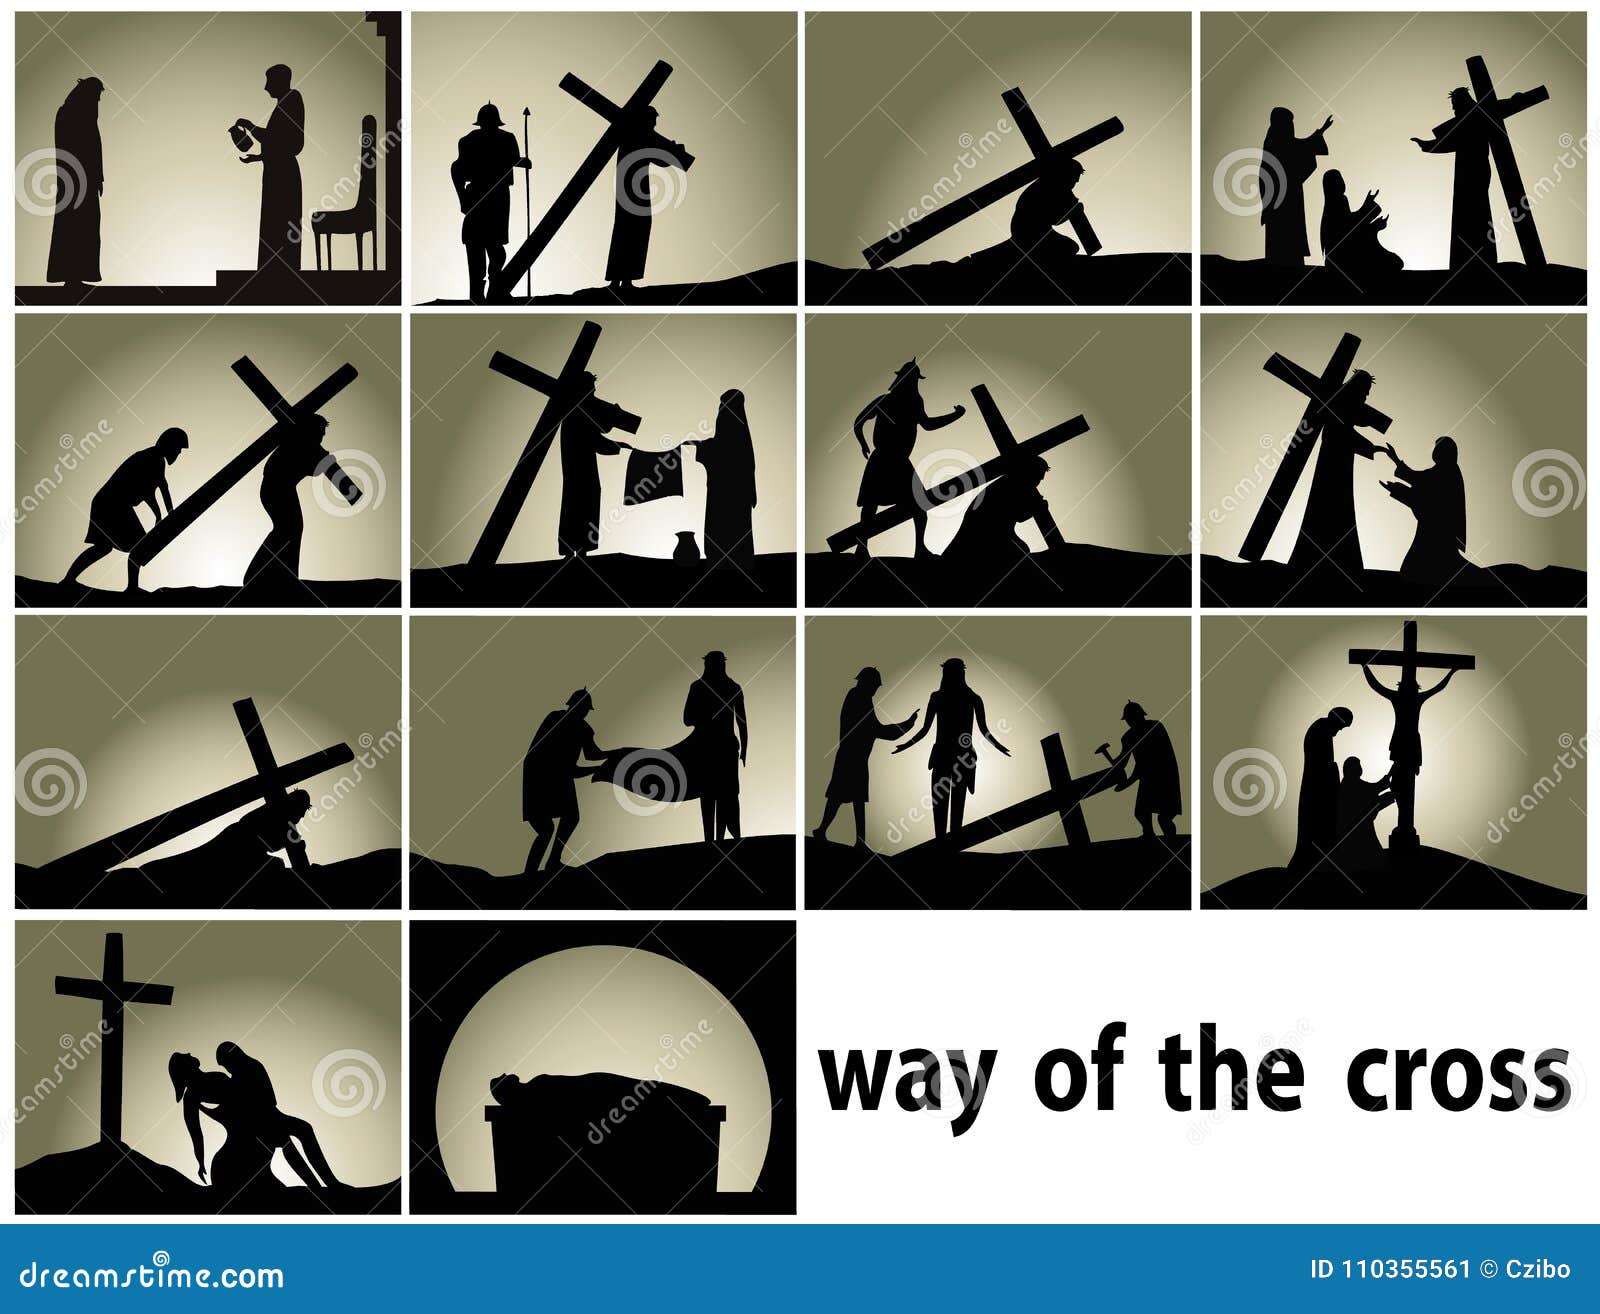 abstract religious background with way of the cross stations